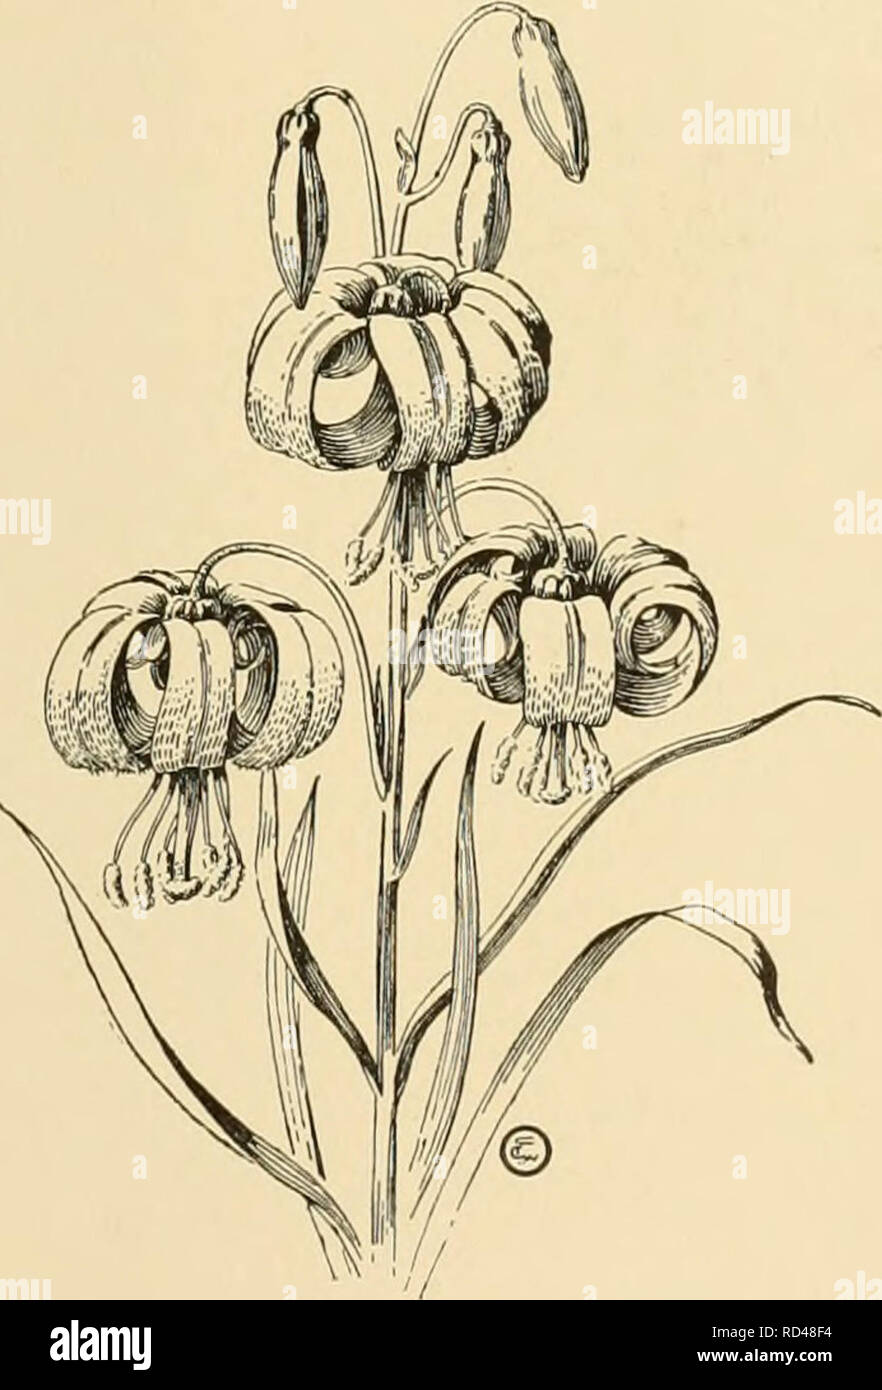 . Cyclopedia of American horticulture : comprising suggestions for cultivation of horticultural plants, descriptions of the species of fruits, vegetables, flowers, and ornamental plants sold in the United States and Canada, together with geographical and biographical sketches. Gardening; Horticulture; Horticulture; Horticulture. LILIUM SUBGENUS IV. A. Foliage mostly ivhorled. B. Li's. ill small whorls of less than S or partly scattered.. .2:i. Columbianum BE. Lfs. nearly all in large u'horls of 8 or more. c. Bull) large, horizontally elongated 24. puberulum CC. Bulb small, globose. D. Fls.piir Stock Photo